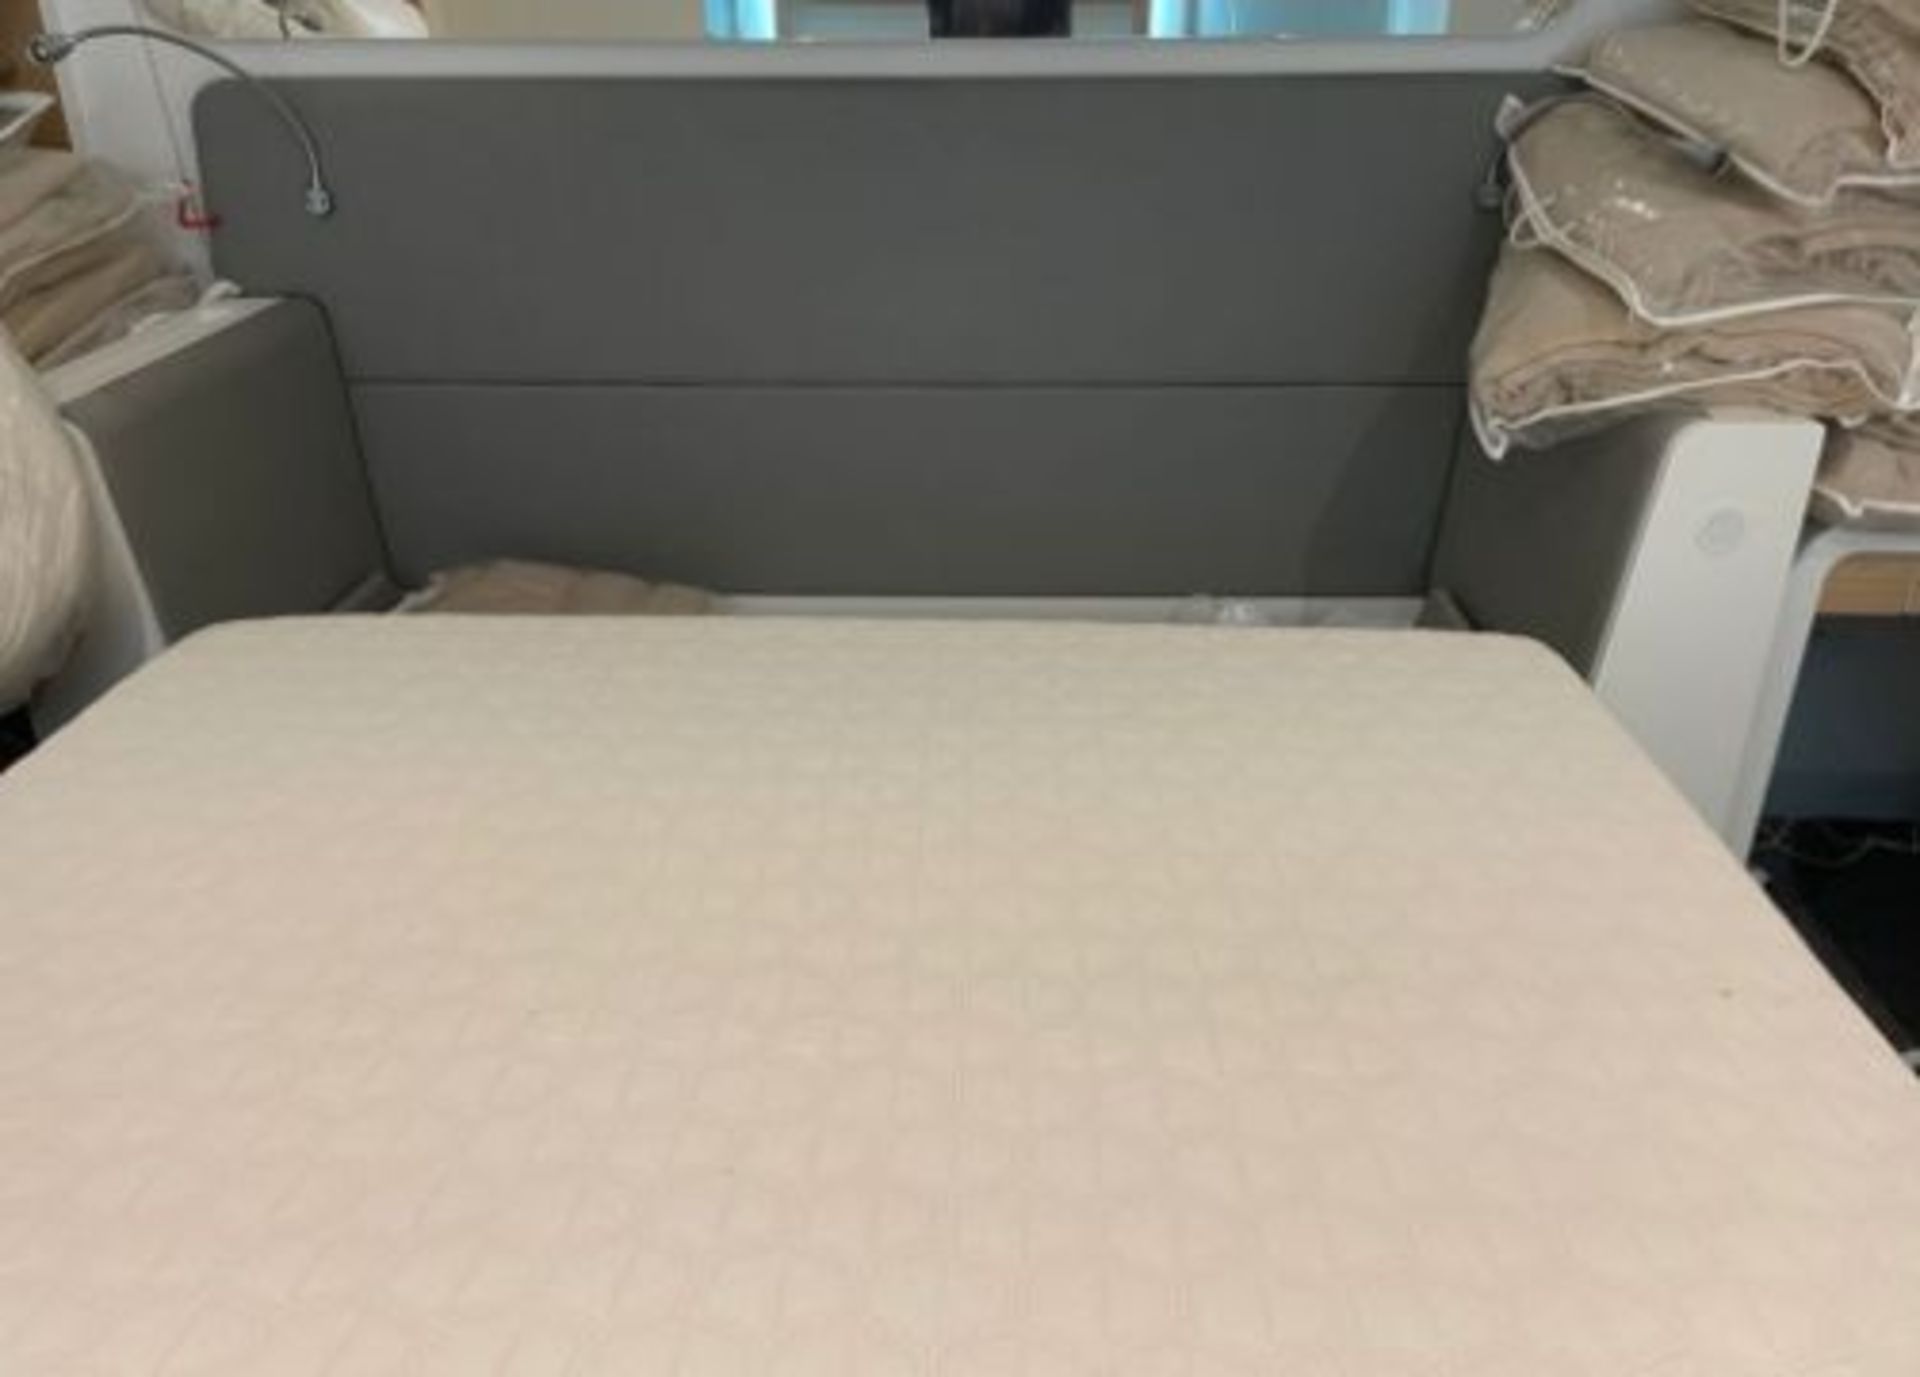 1 x Double Adjustable Space Saving Smart Bed With Serta Motion Memory Foam Mattress - Signature - Image 6 of 8